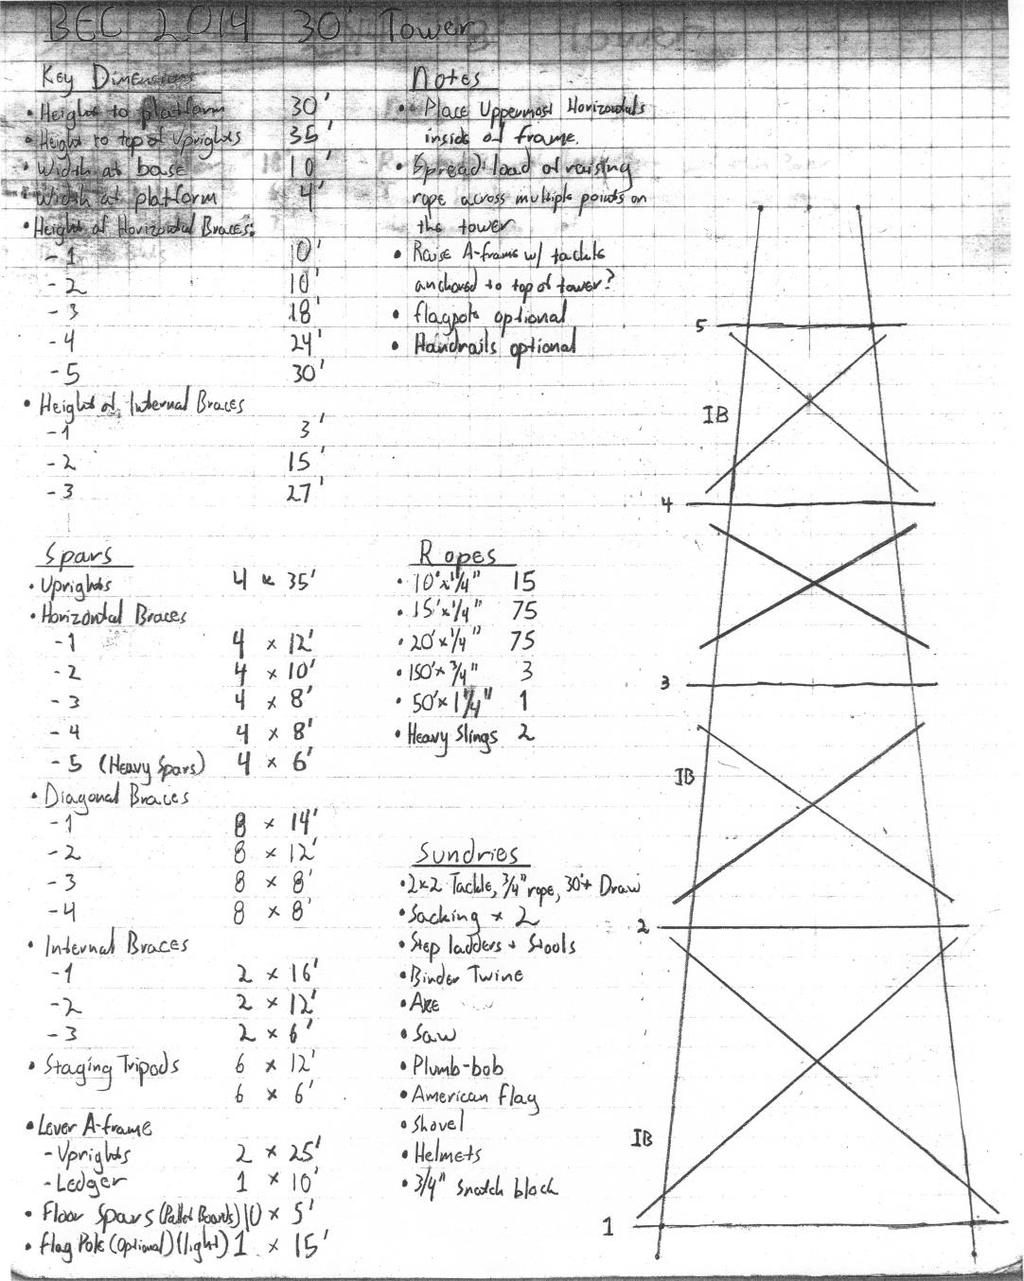 Plans A 30 tower is a complex project and requires a fairly detailed construction plan. We determine the tower s key dimensions and then draw it to scale on graph paper.